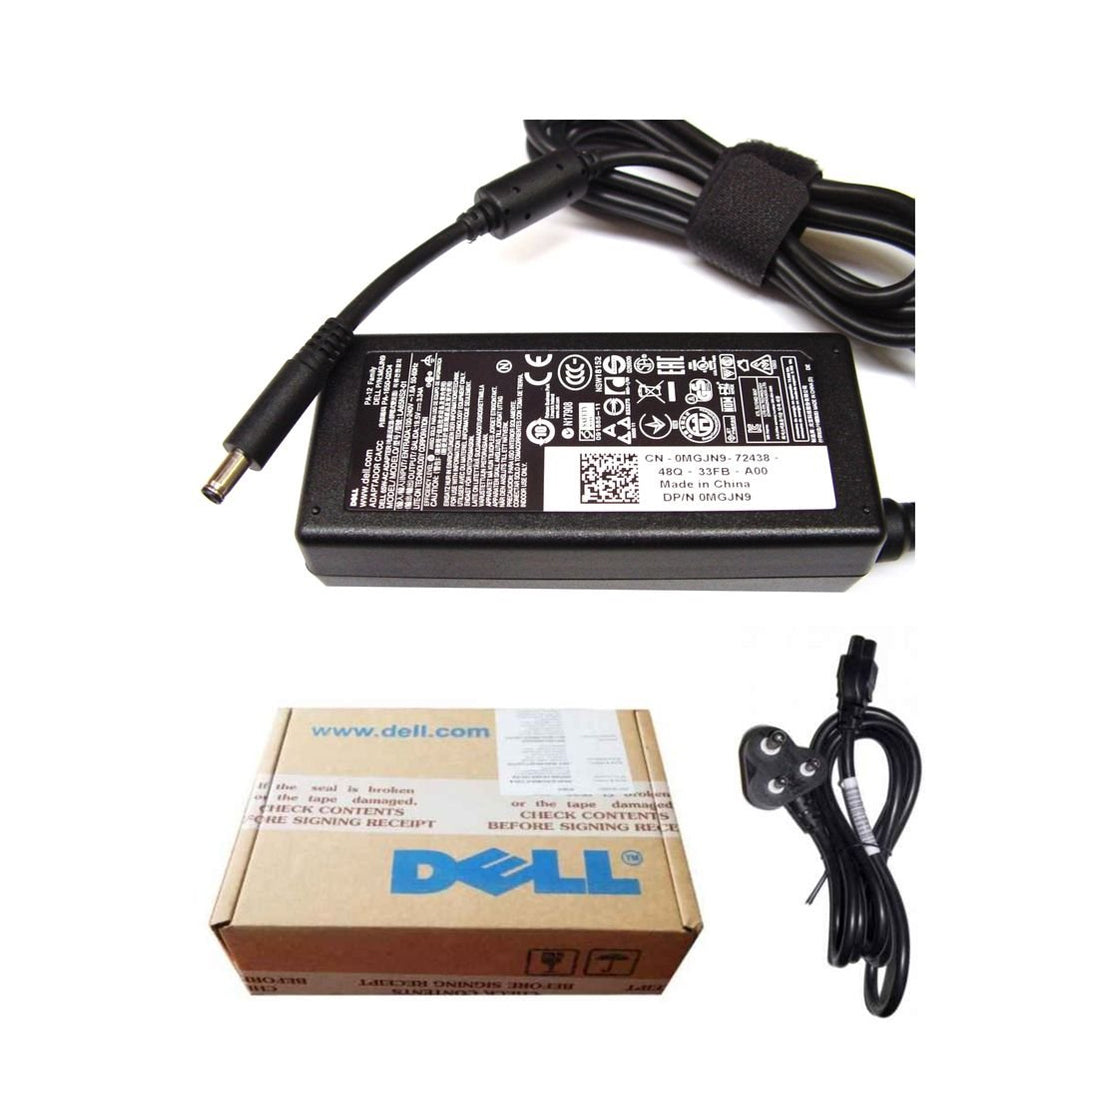 Dell Original 65W 19.5V 4.5mm Pin Laptop Charger Adapter for Inspiron 14 3459 With Power Cord